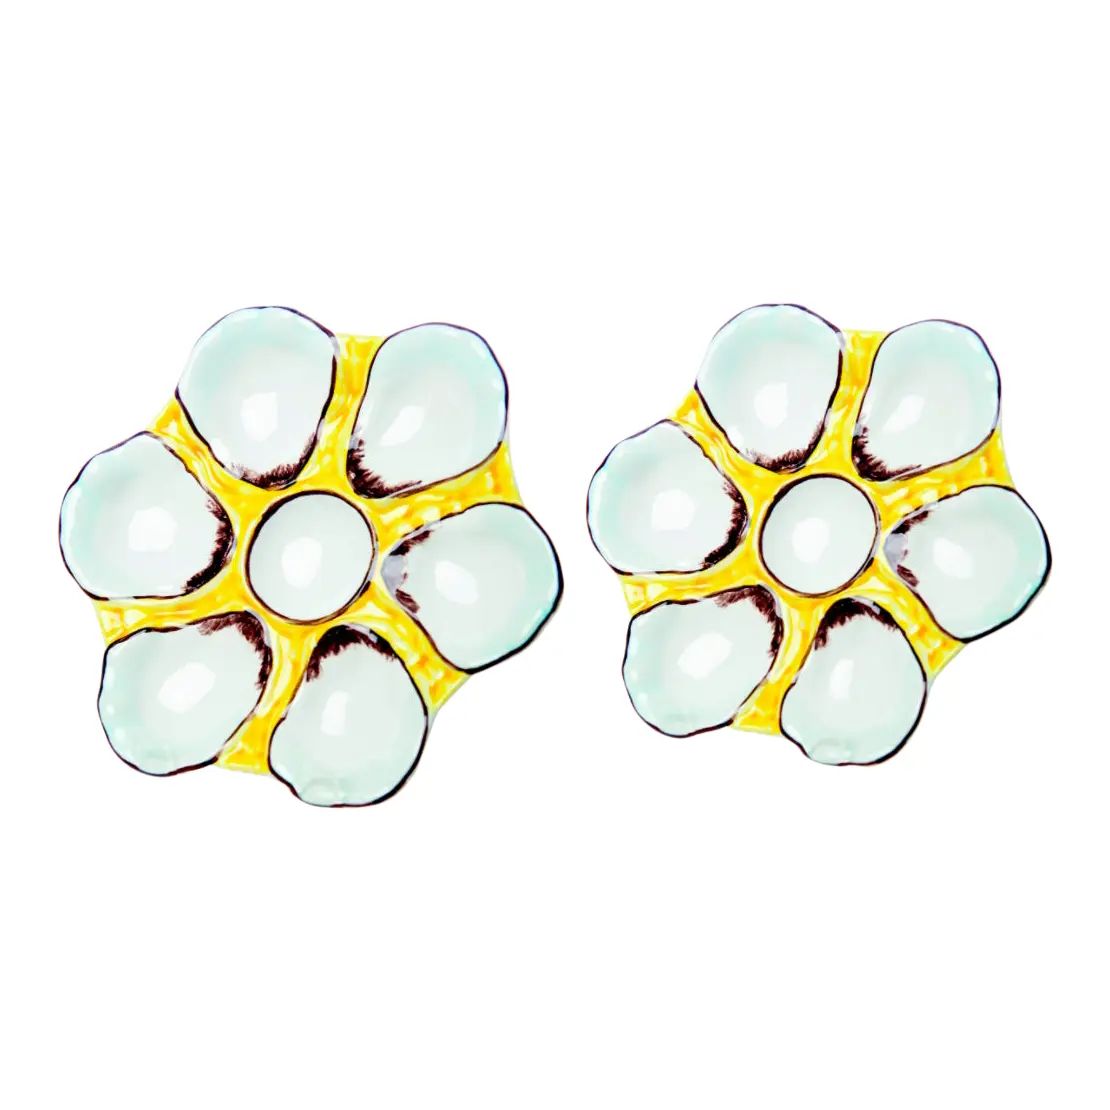 Ceramic Yellow Oyster Plates - A Pair | Chairish